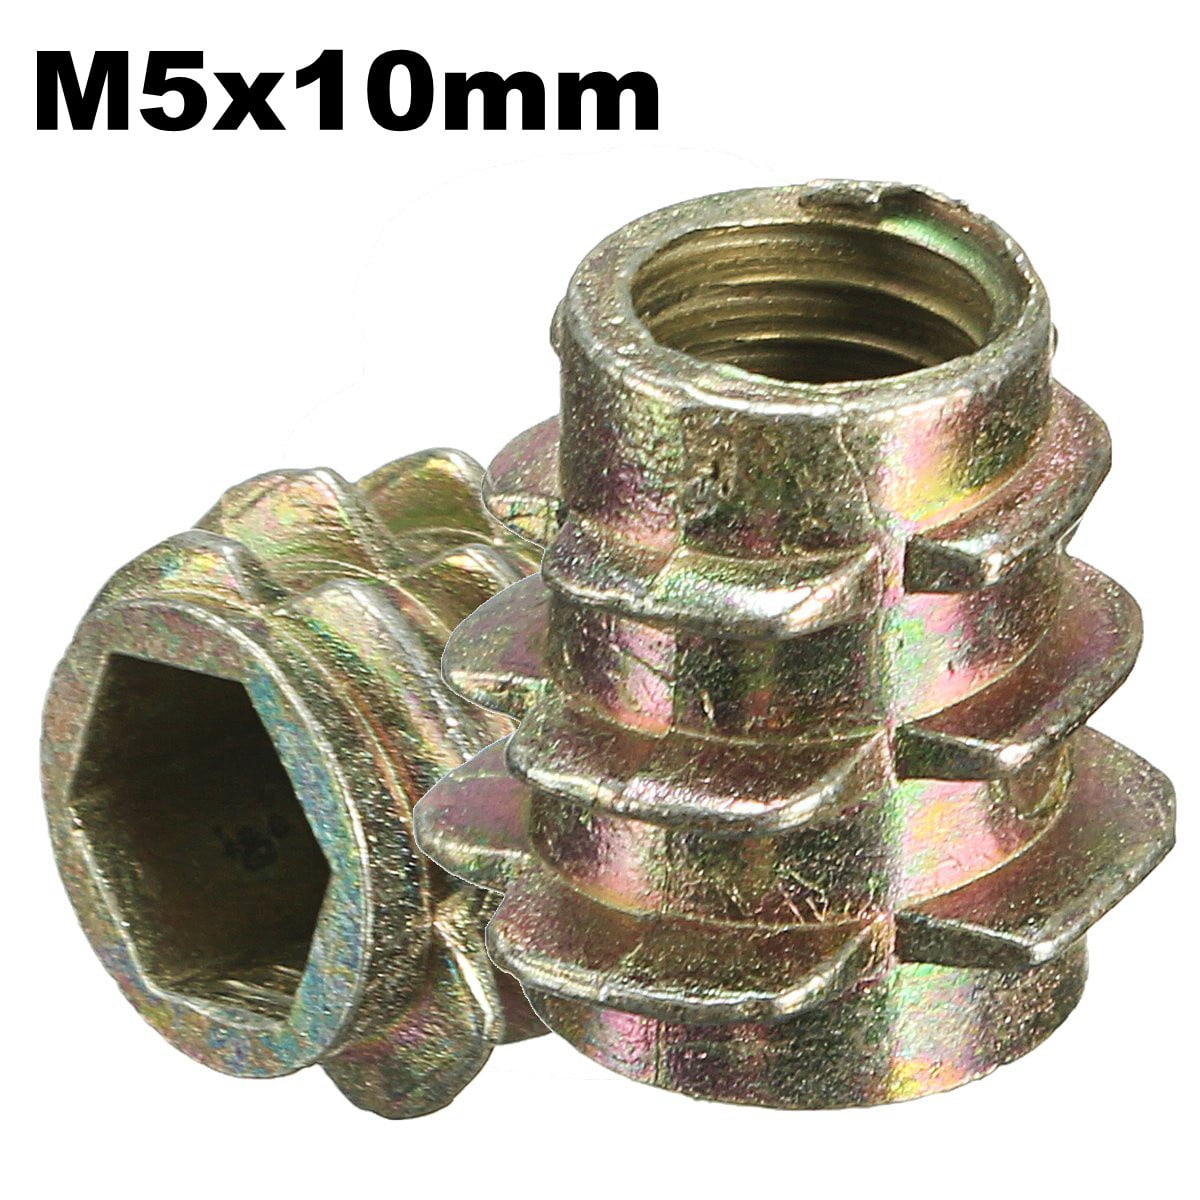 M8 THREADED HEX DRIVE FIXING TYPE D OR E WOOD INSERT FIXING FURNITURE NUTS 